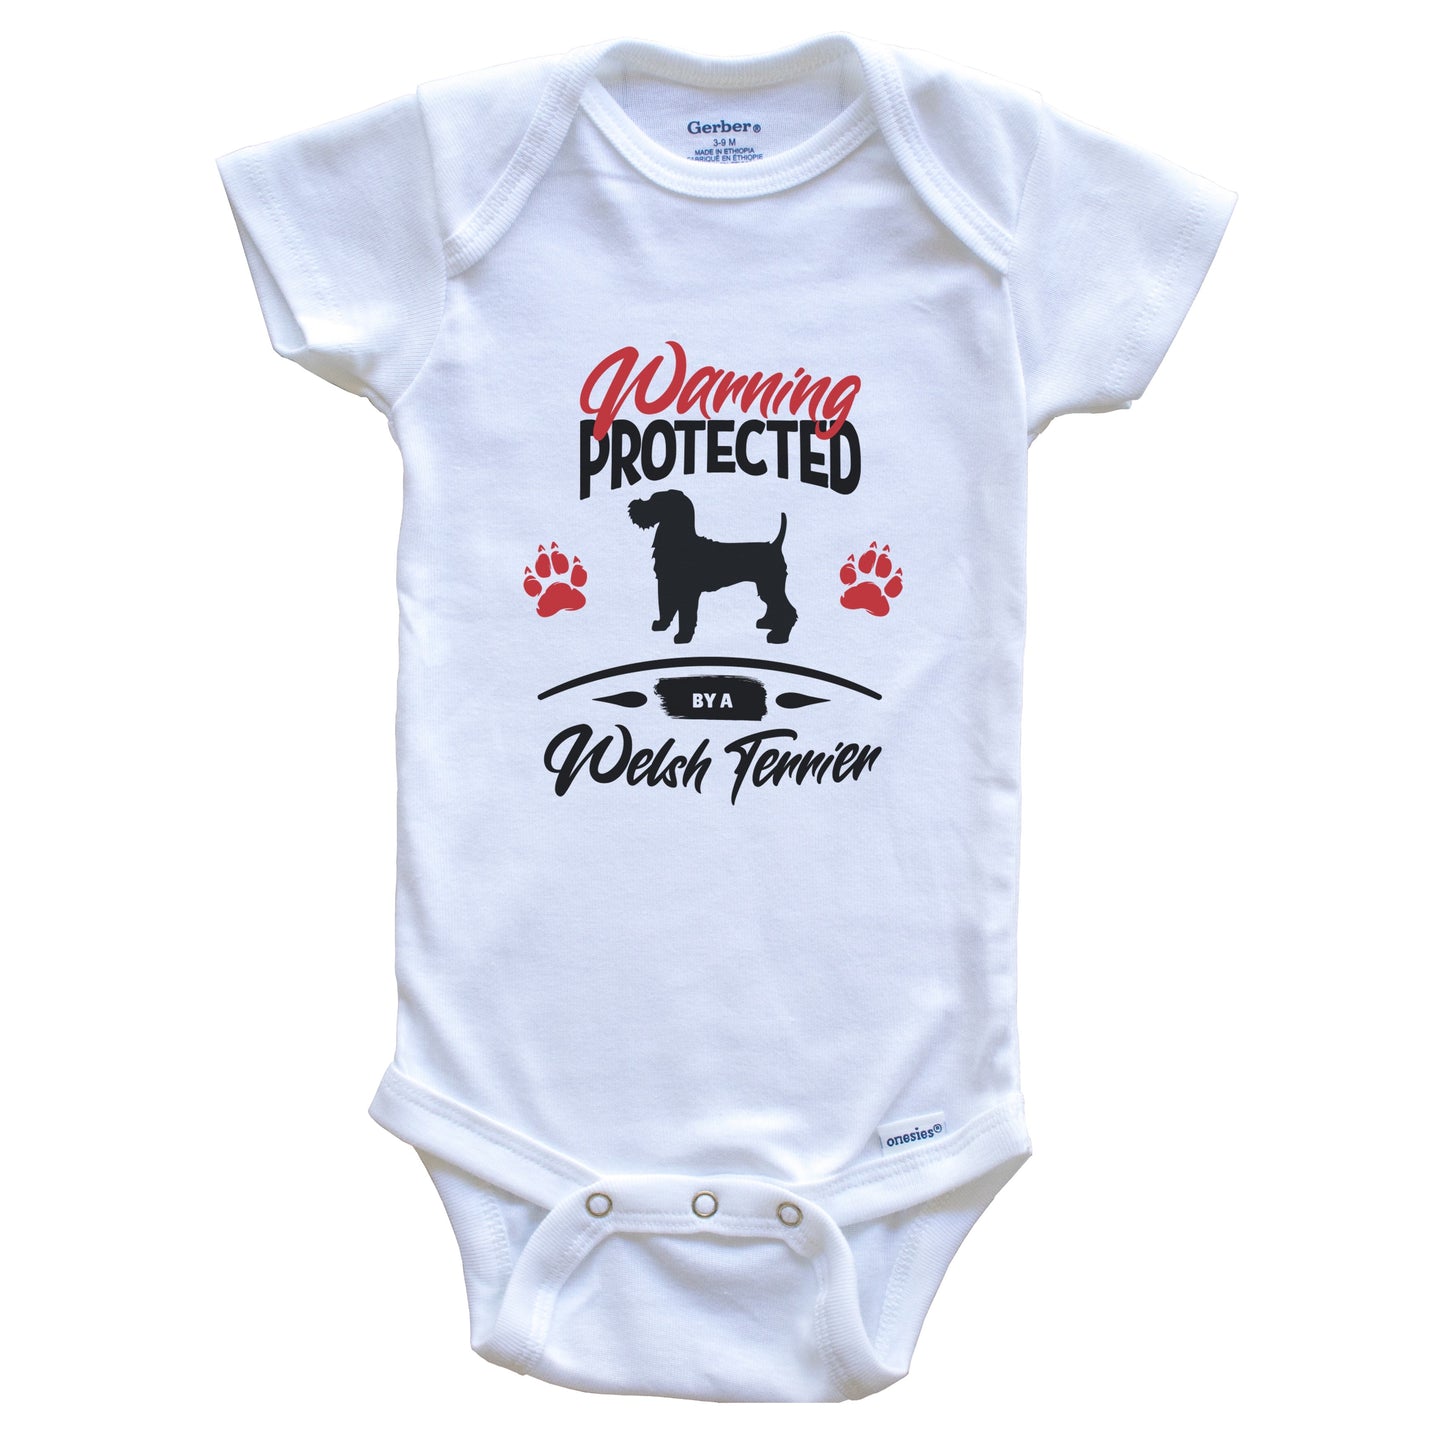 Warning Protected By A Welsh Terrier Funny Dog Owner Baby Bodysuit